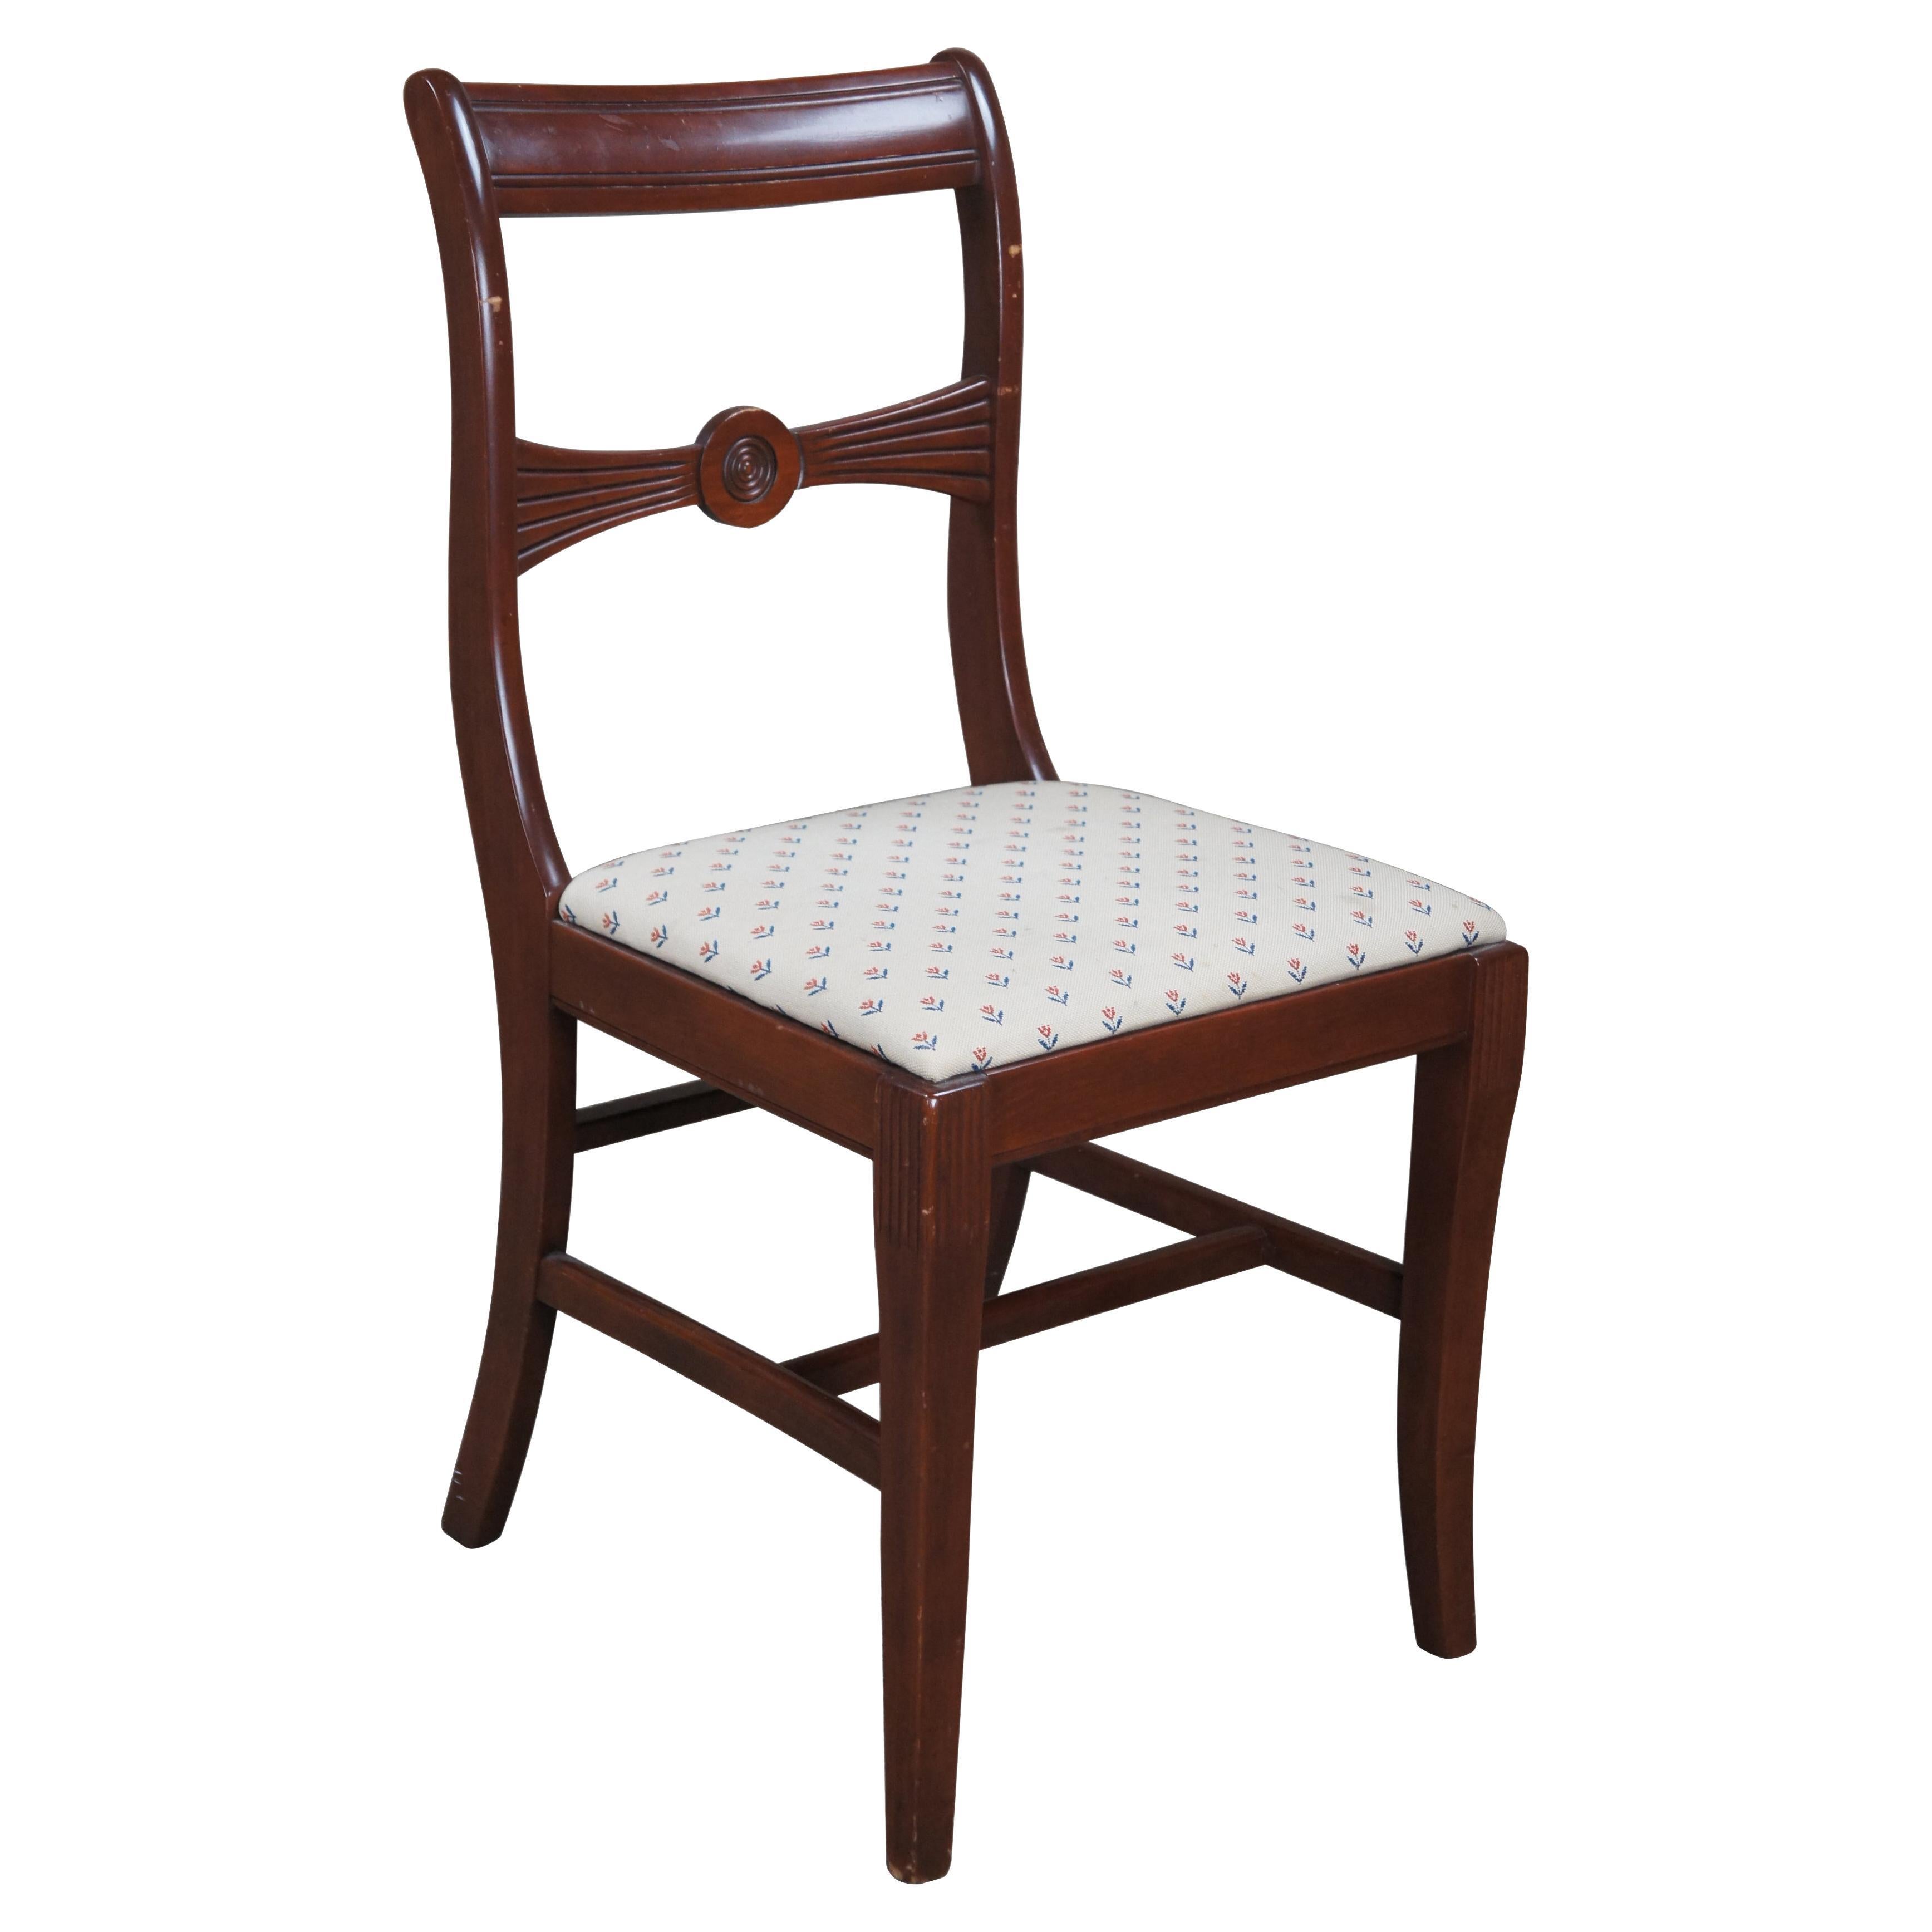 Antique Duncan Phyfe English Regency Style Mahogany Bow Back Dining Side Chair  For Sale